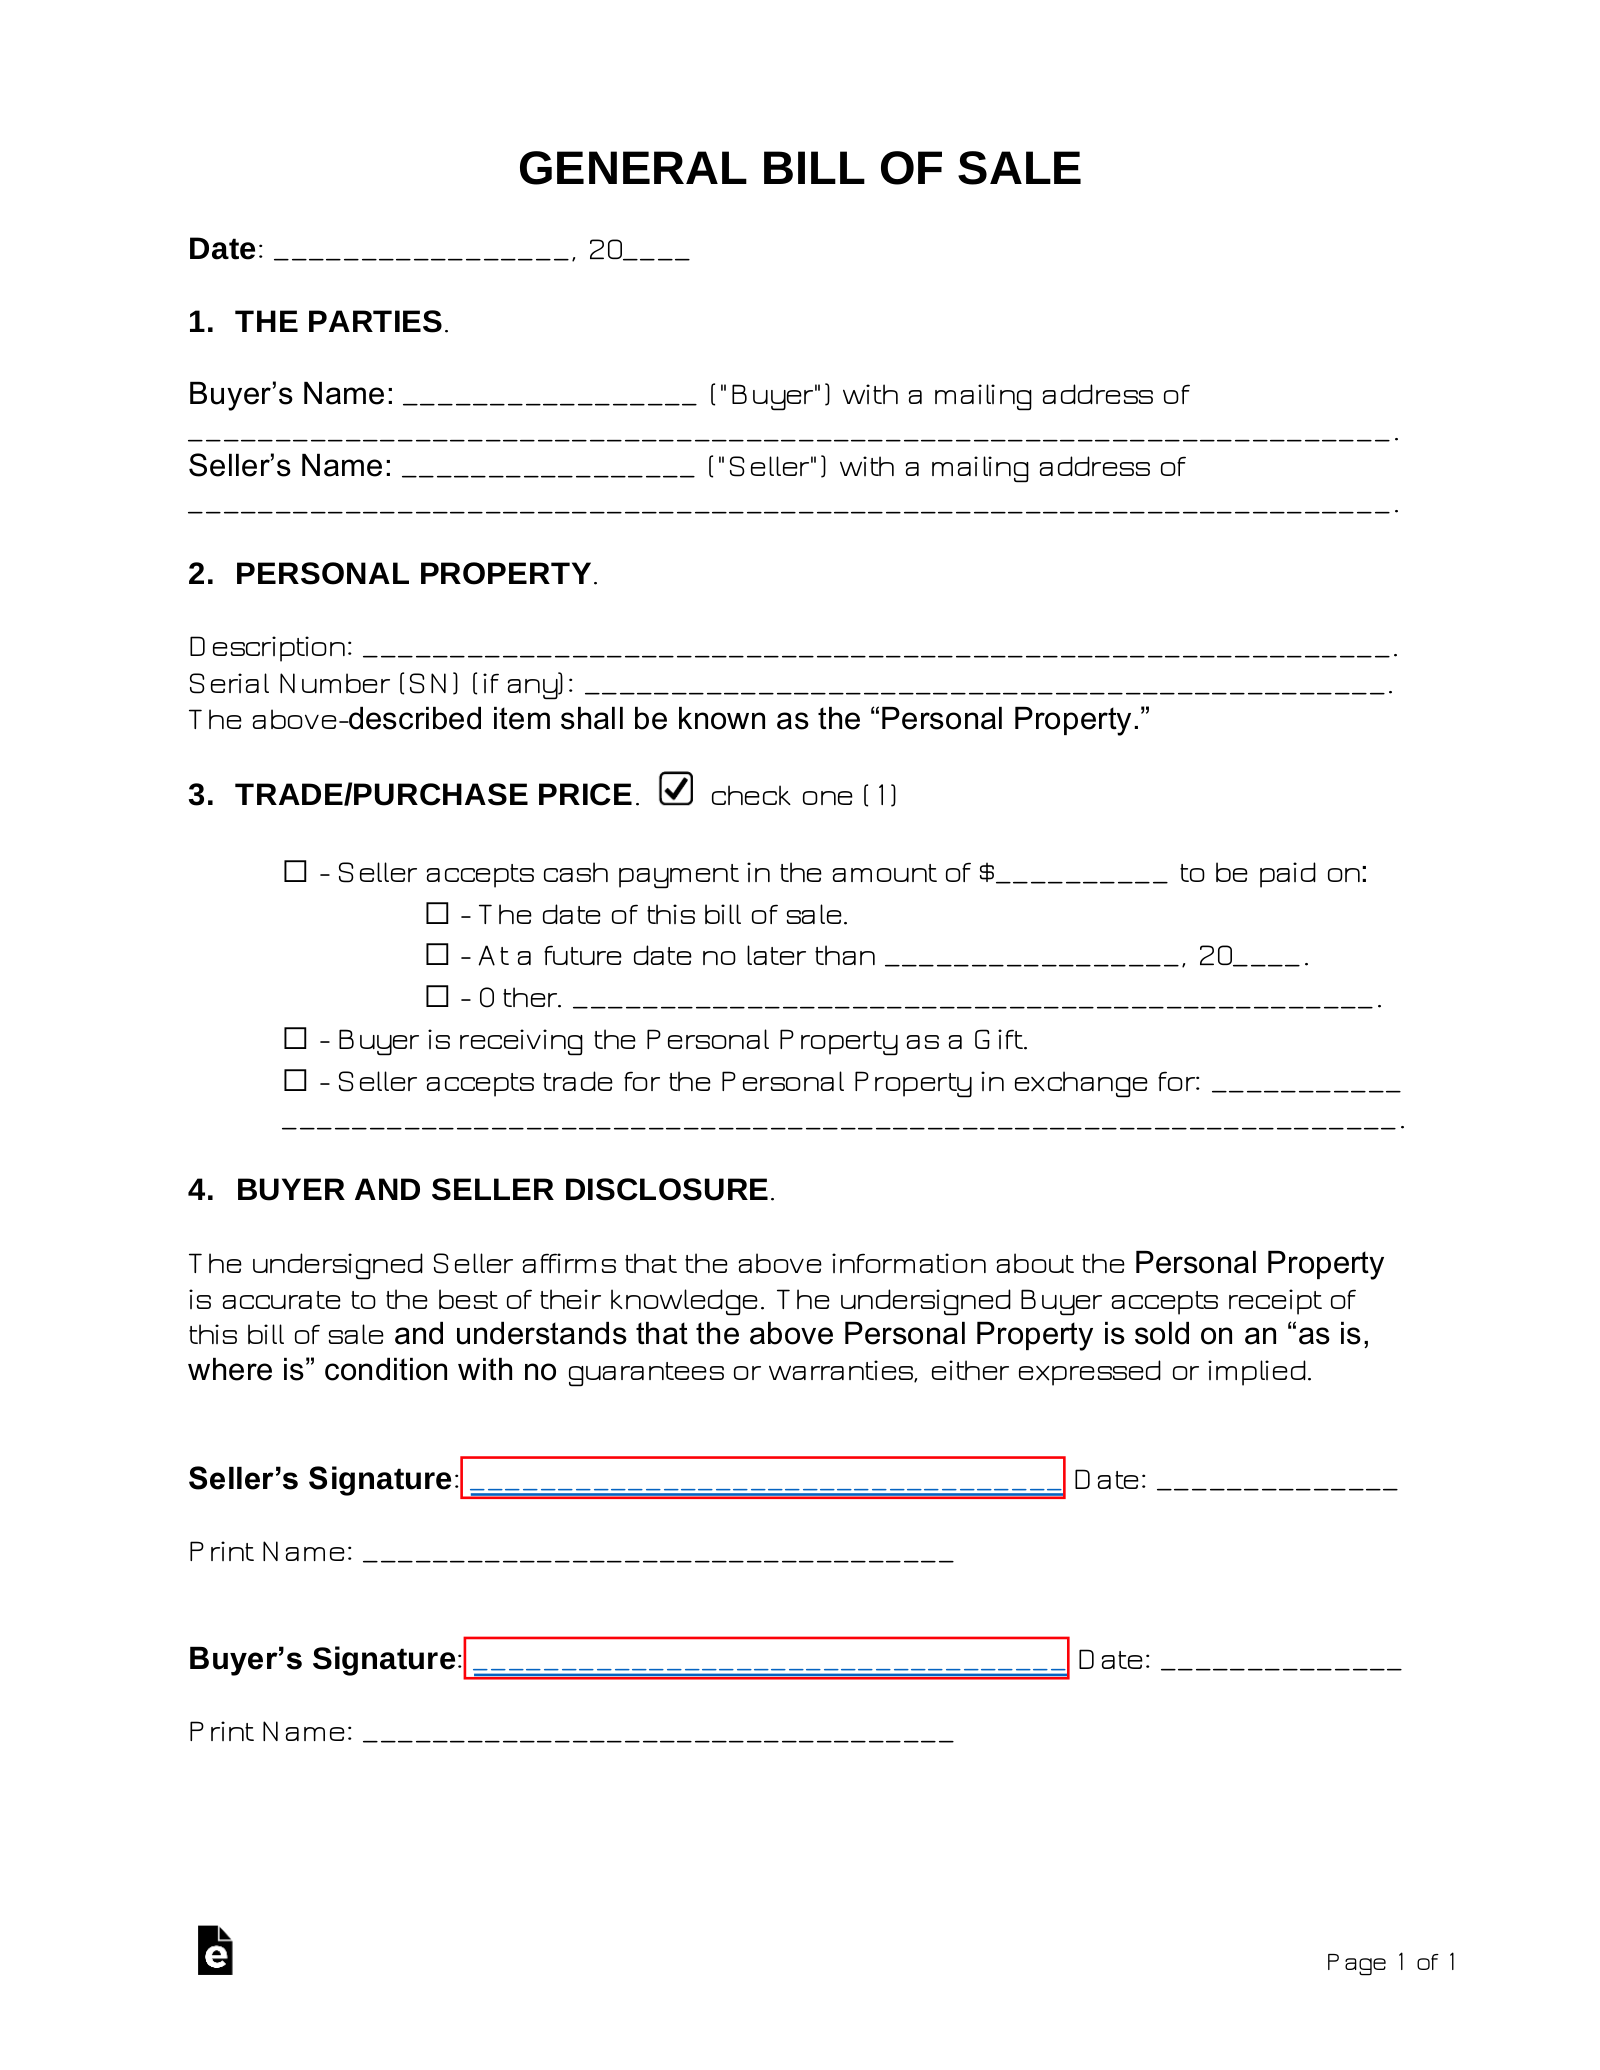 Free General (Personal Property) Bill of Sale Form - PDF | Word – eForms